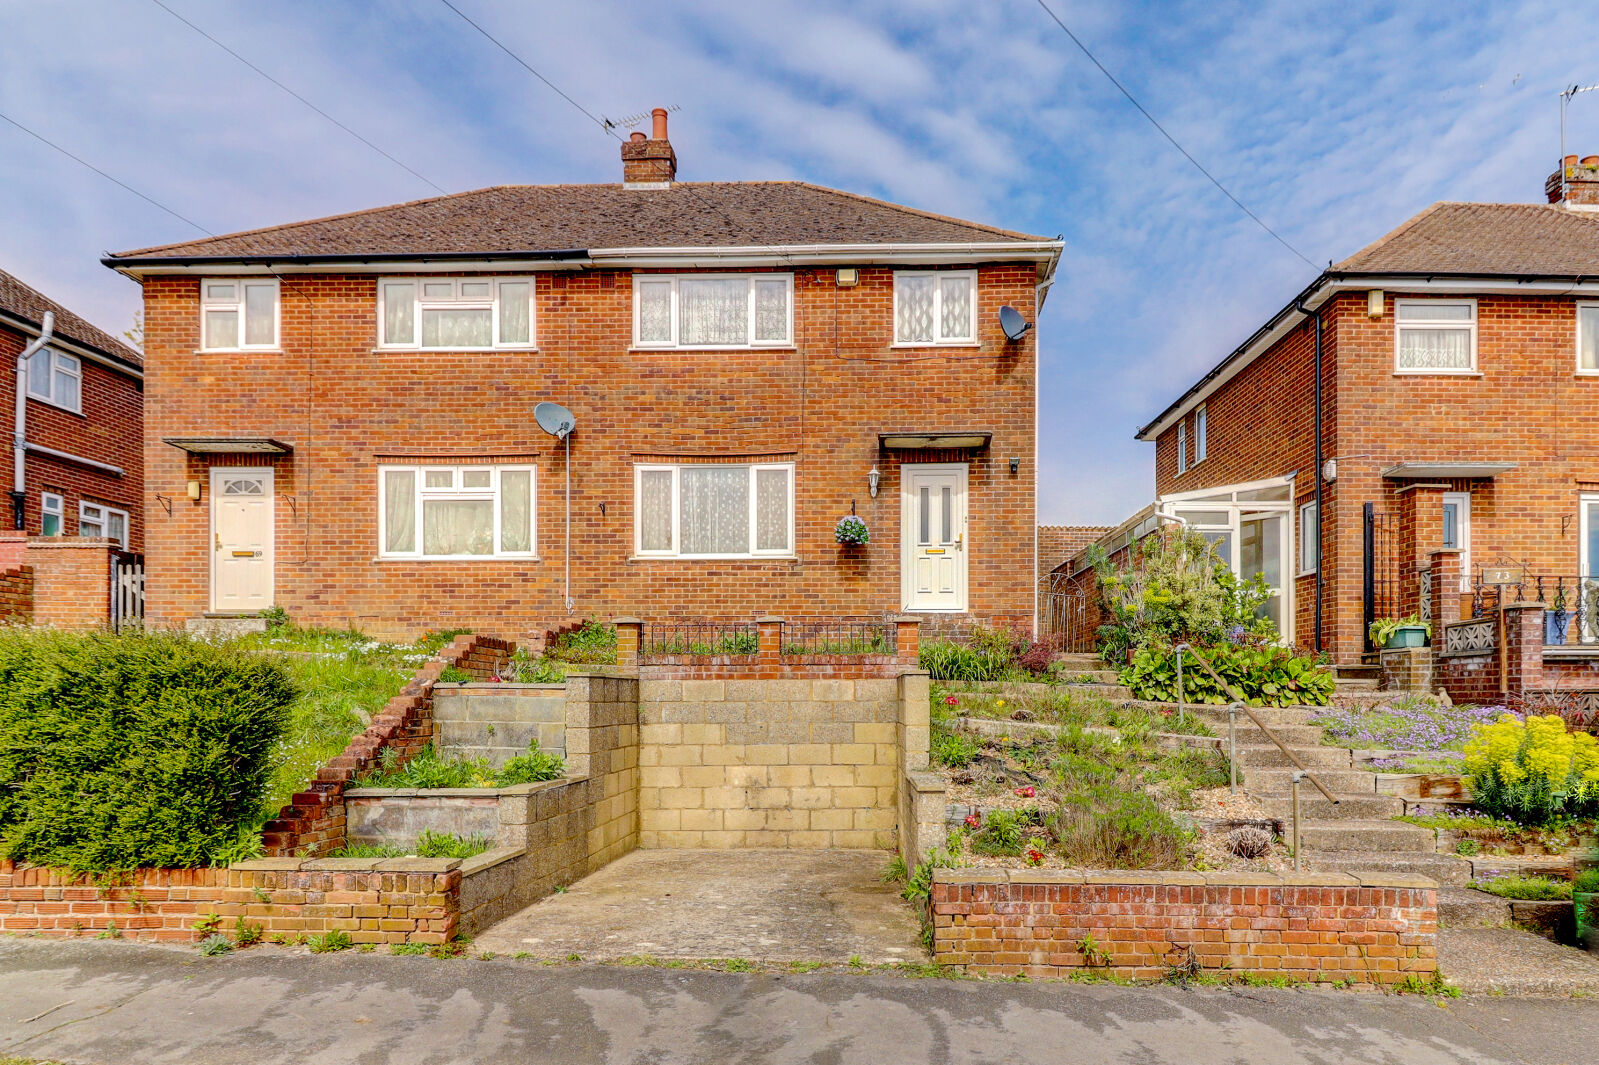 3 bedroom semi detached house for sale Hillary Road, High Wycombe, HP13, main image